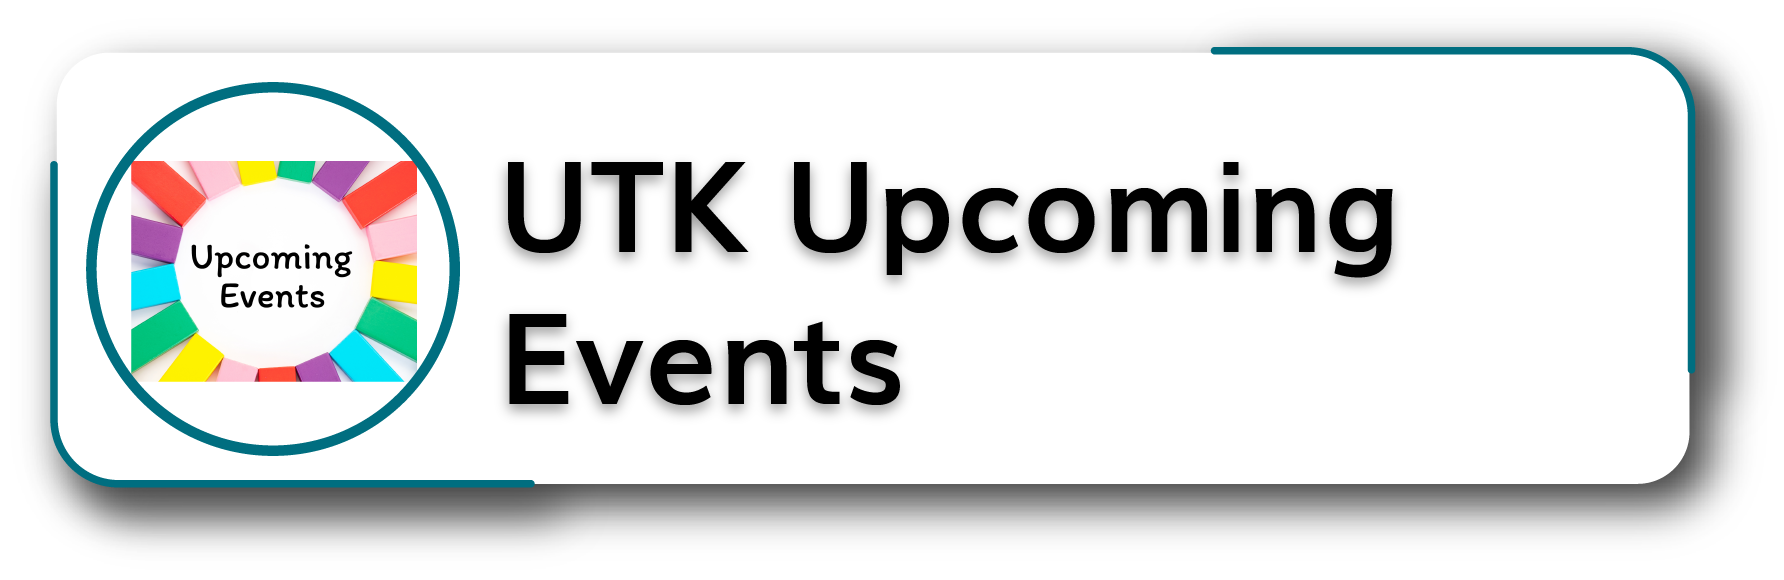 UTK Upcoming Events Button